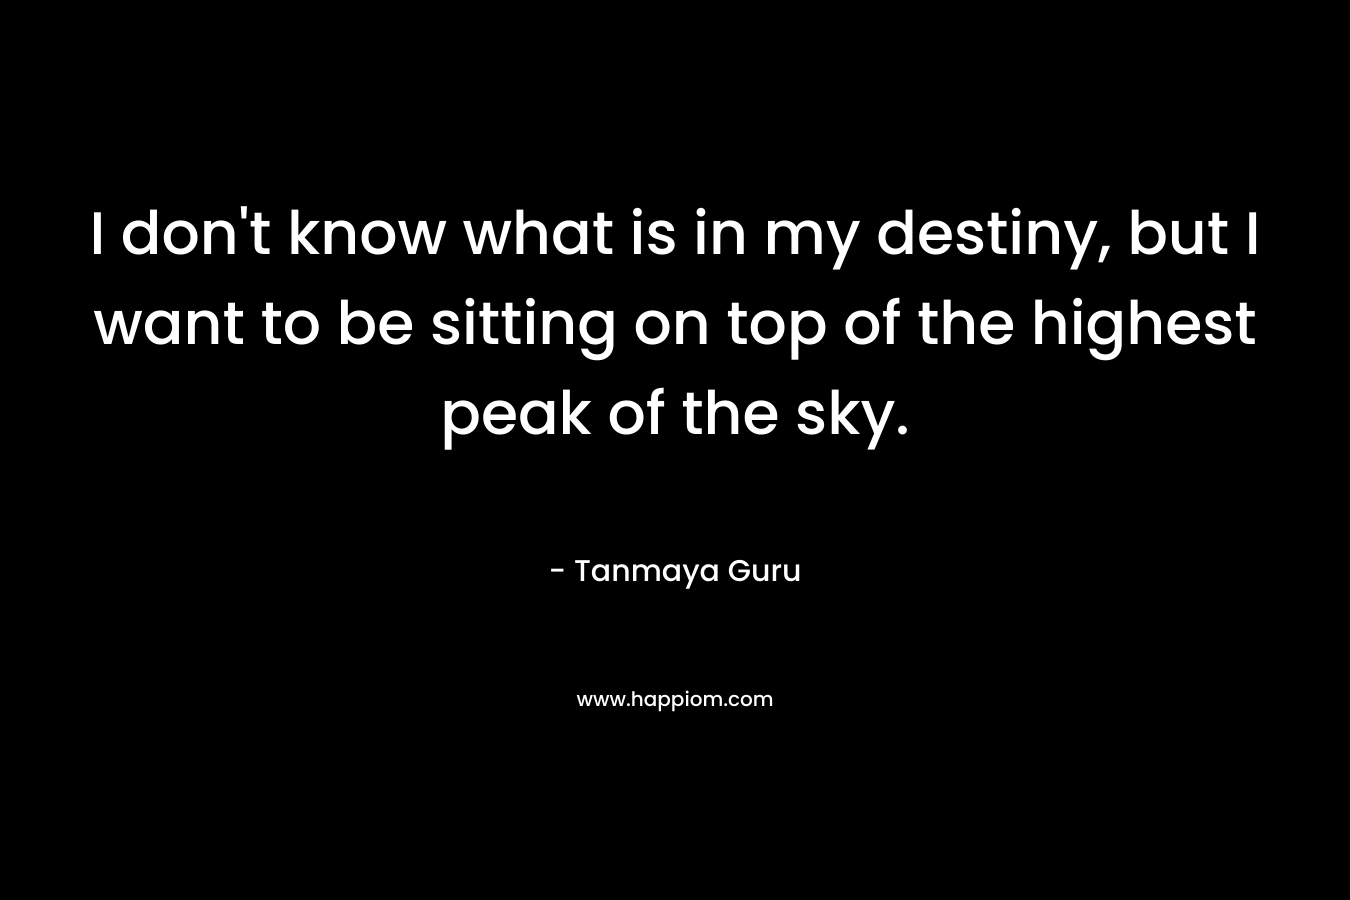 I don’t know what is in my destiny, but I want to be sitting on top of the highest peak of the sky. – Tanmaya Guru